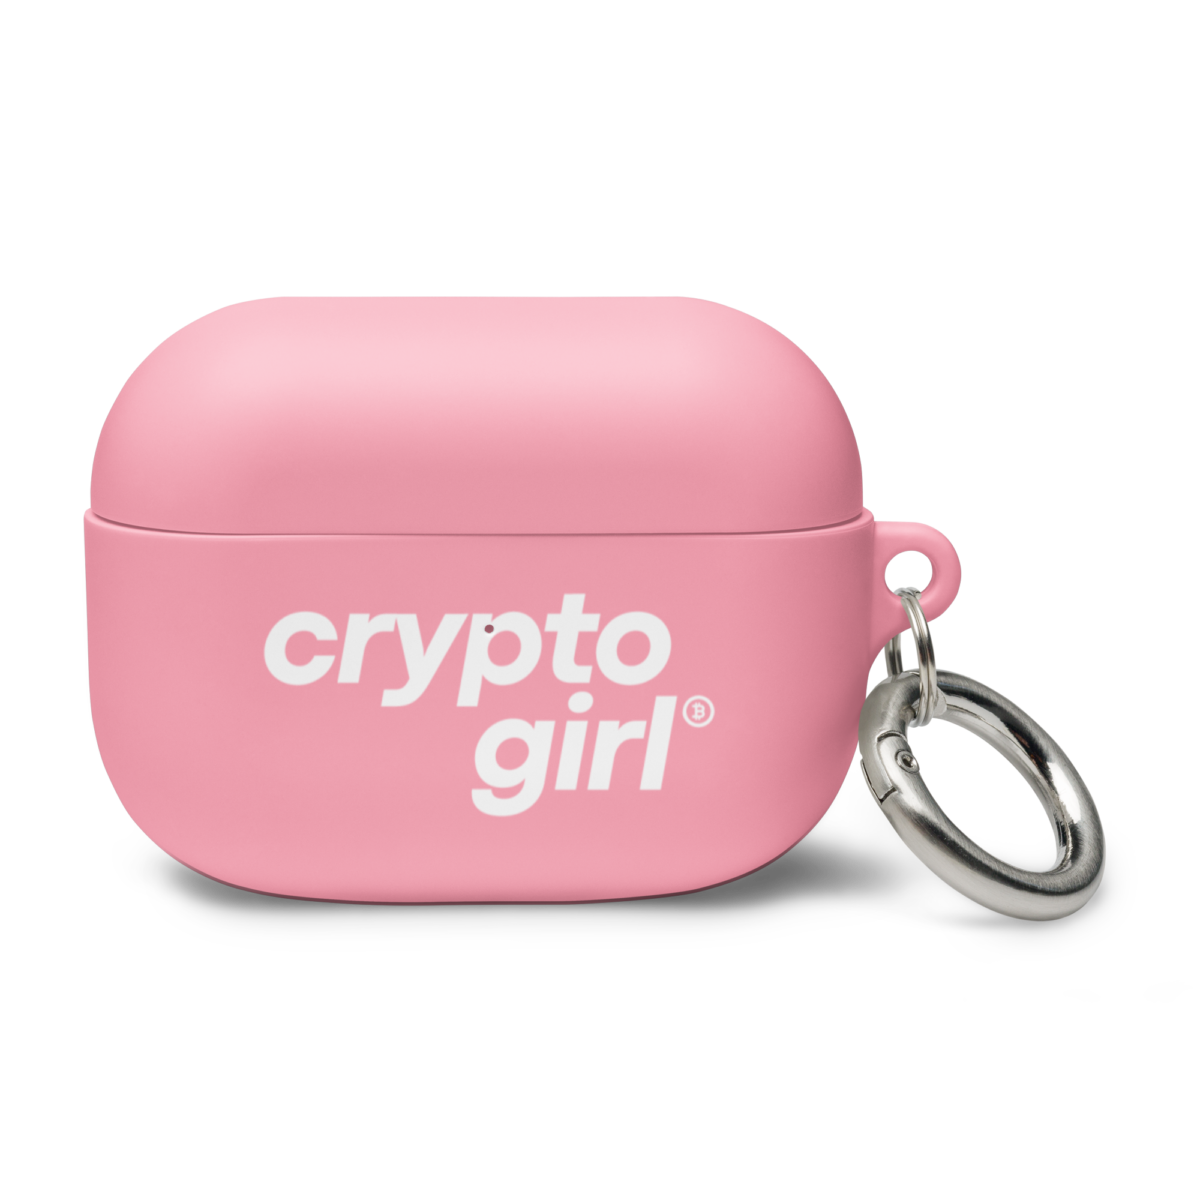 airpods case pink airpods pro front 62e1a4f296bd9 - Crypto Girl AirPods Case